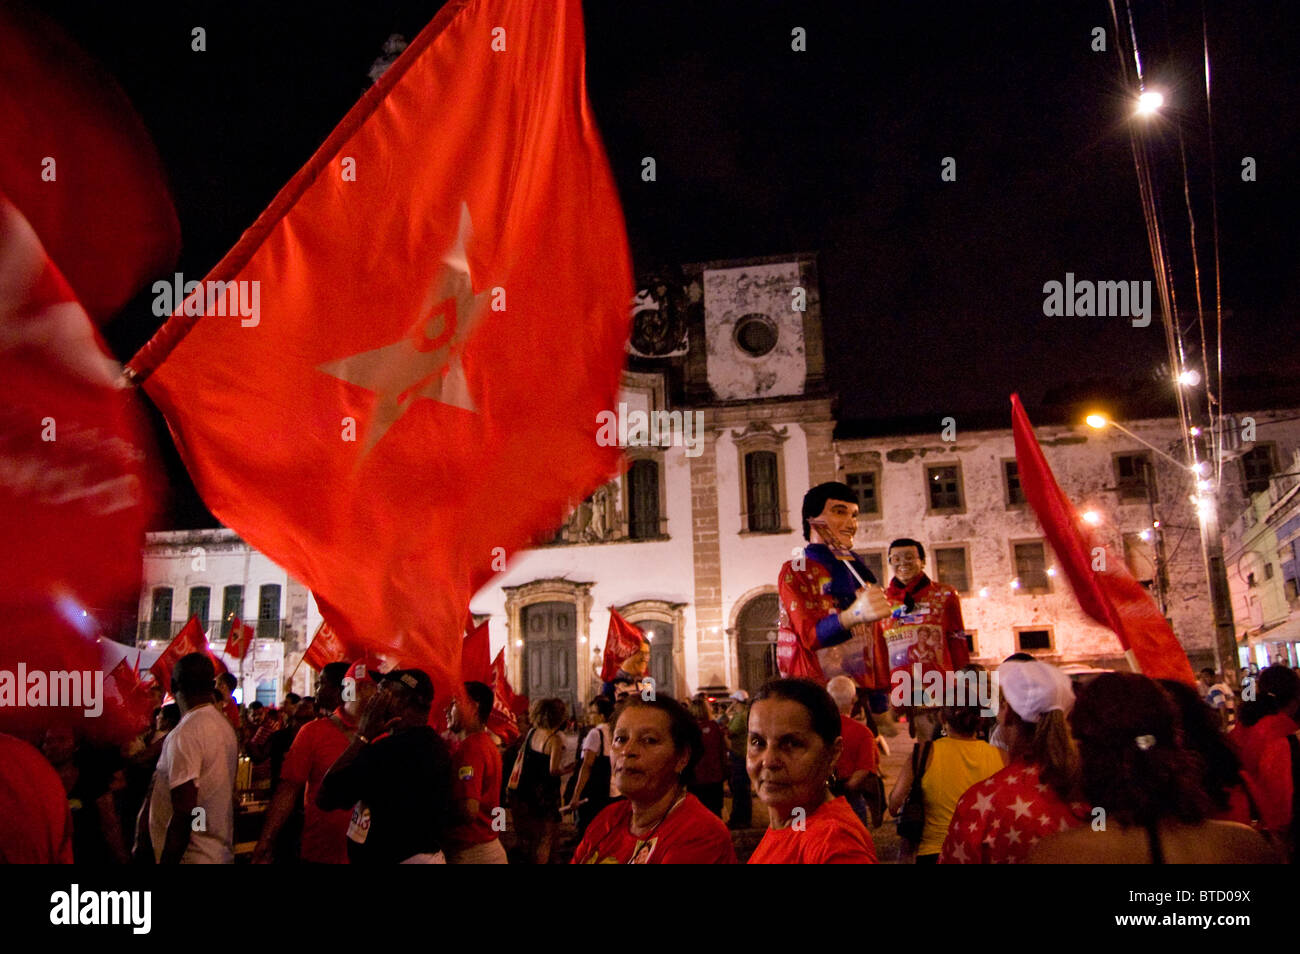 March and campaign in Recife Brazil  prior to presidential election of Dilma Vana Rousseff 22.10.10 Stock Photo